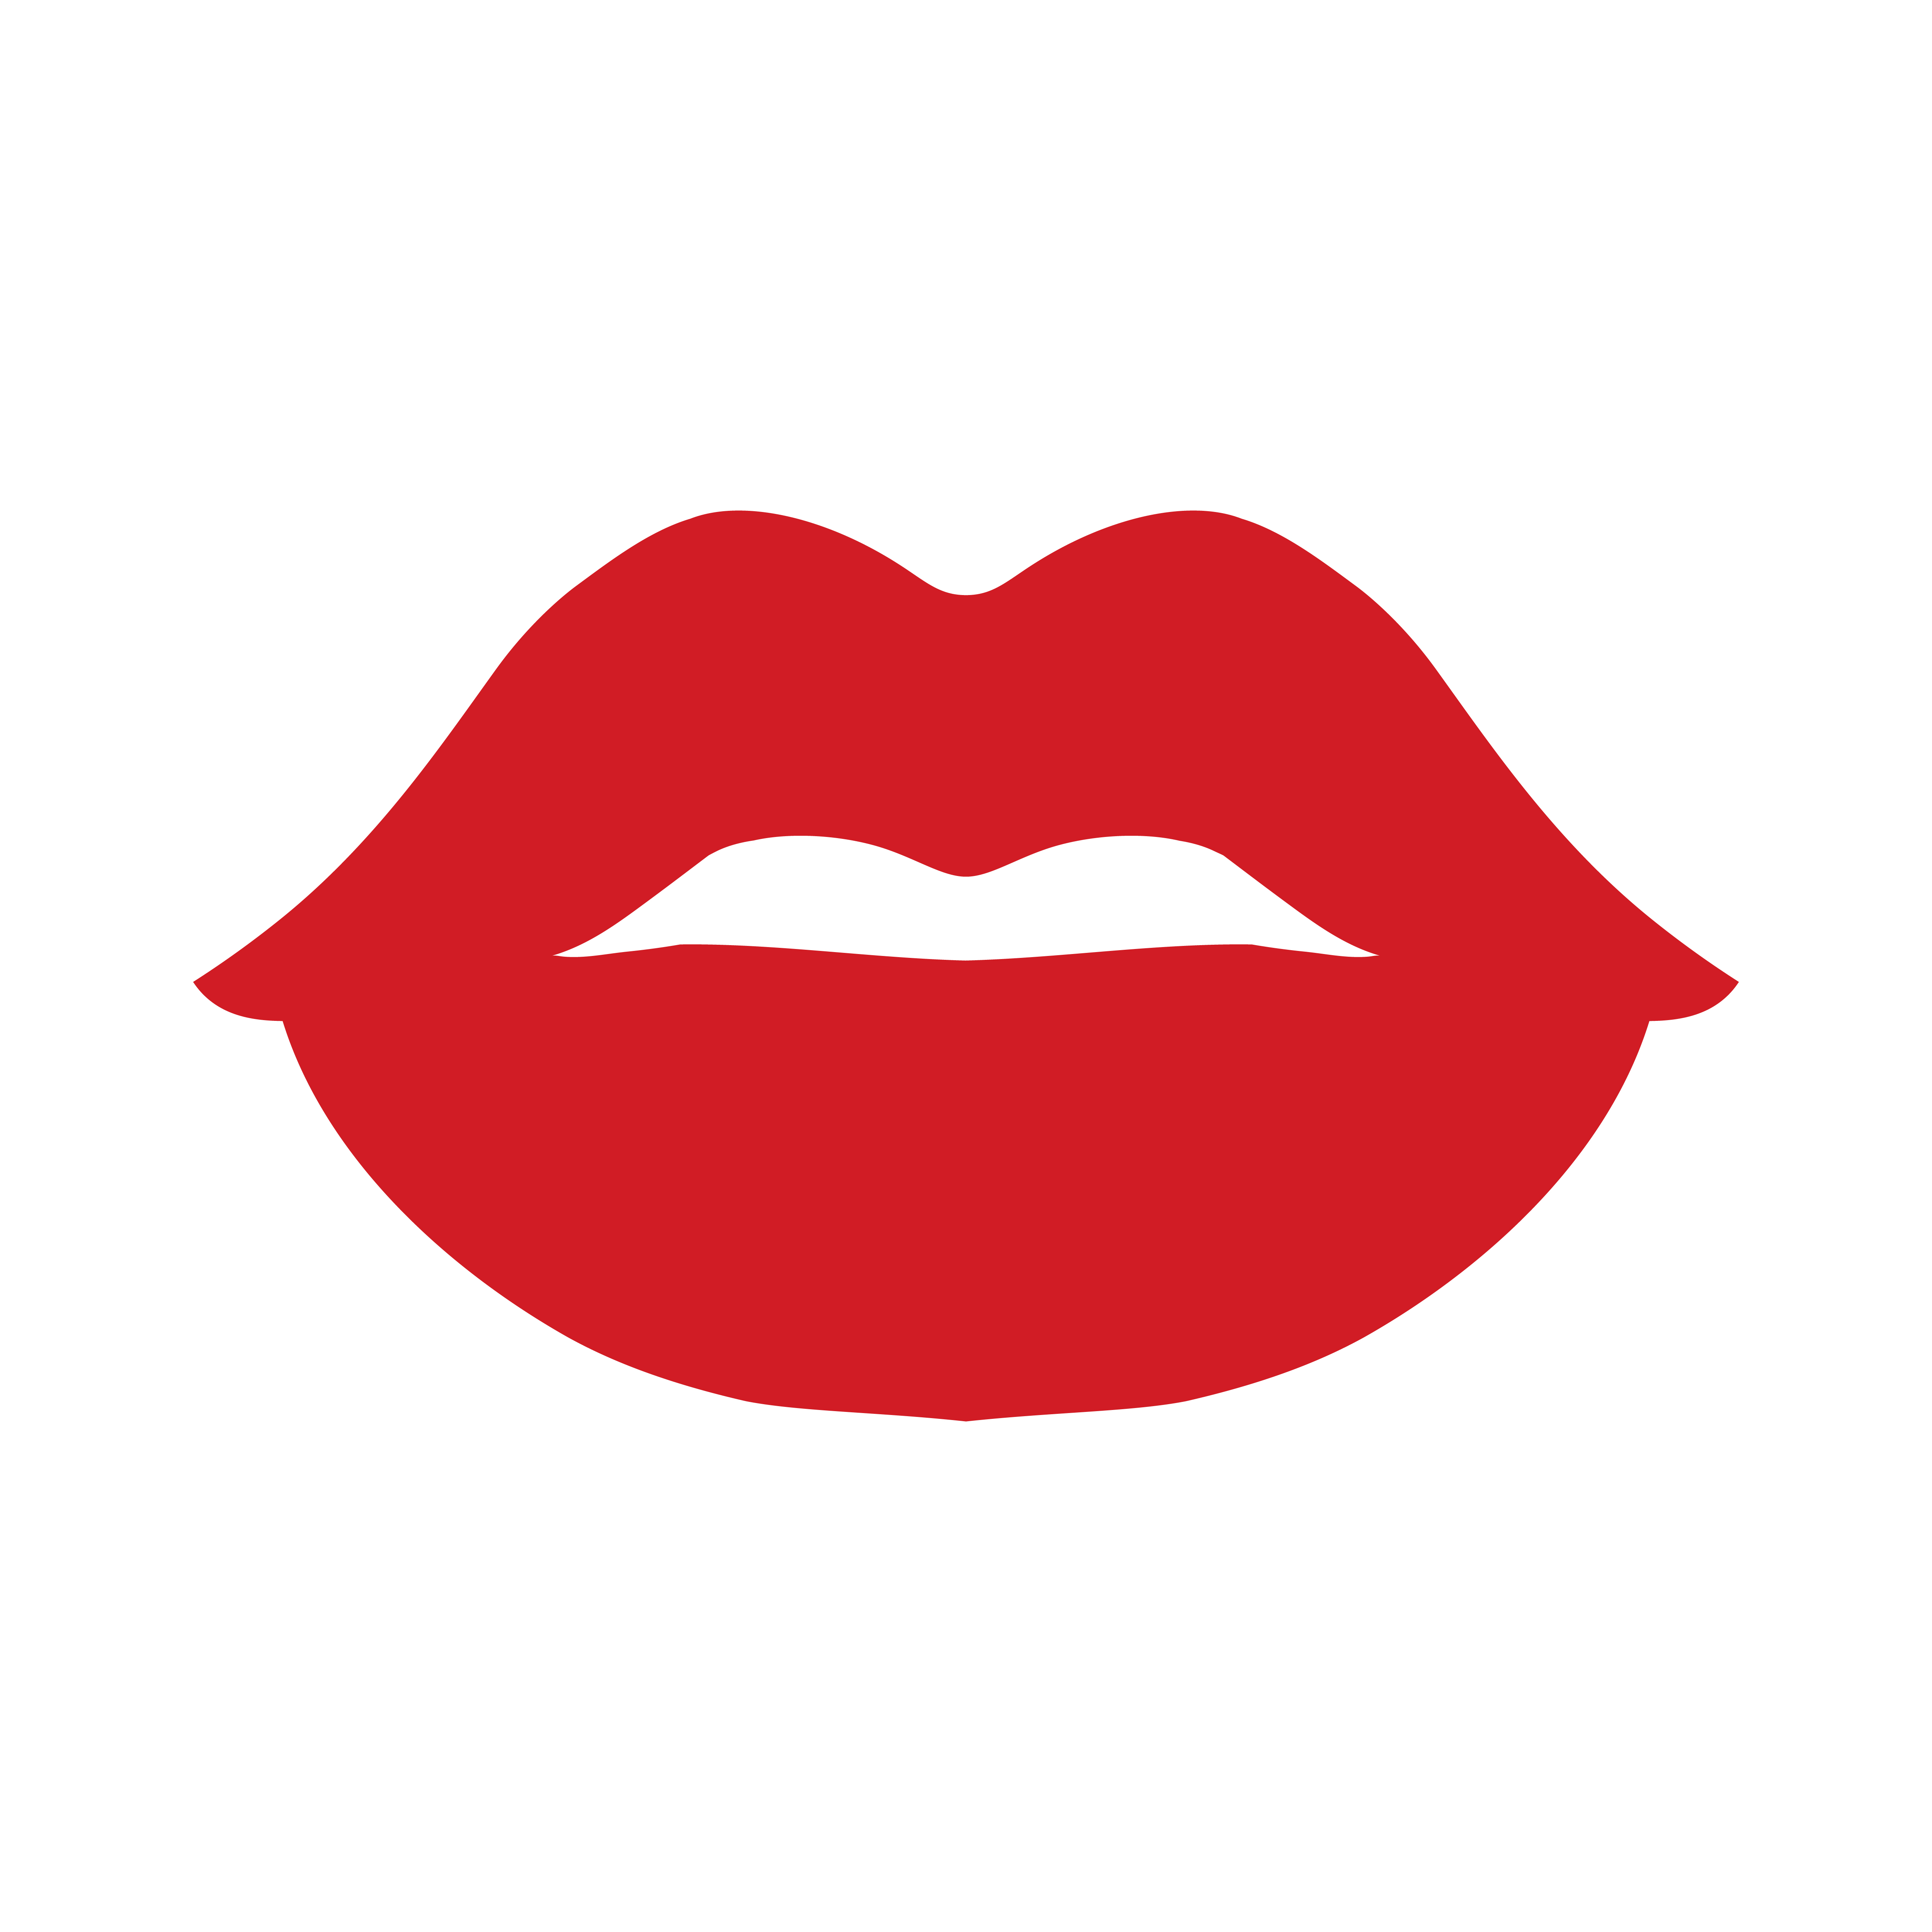 Browse 5,247 incredible Lips Icon vectors, icons, clipart graphics, and bac...